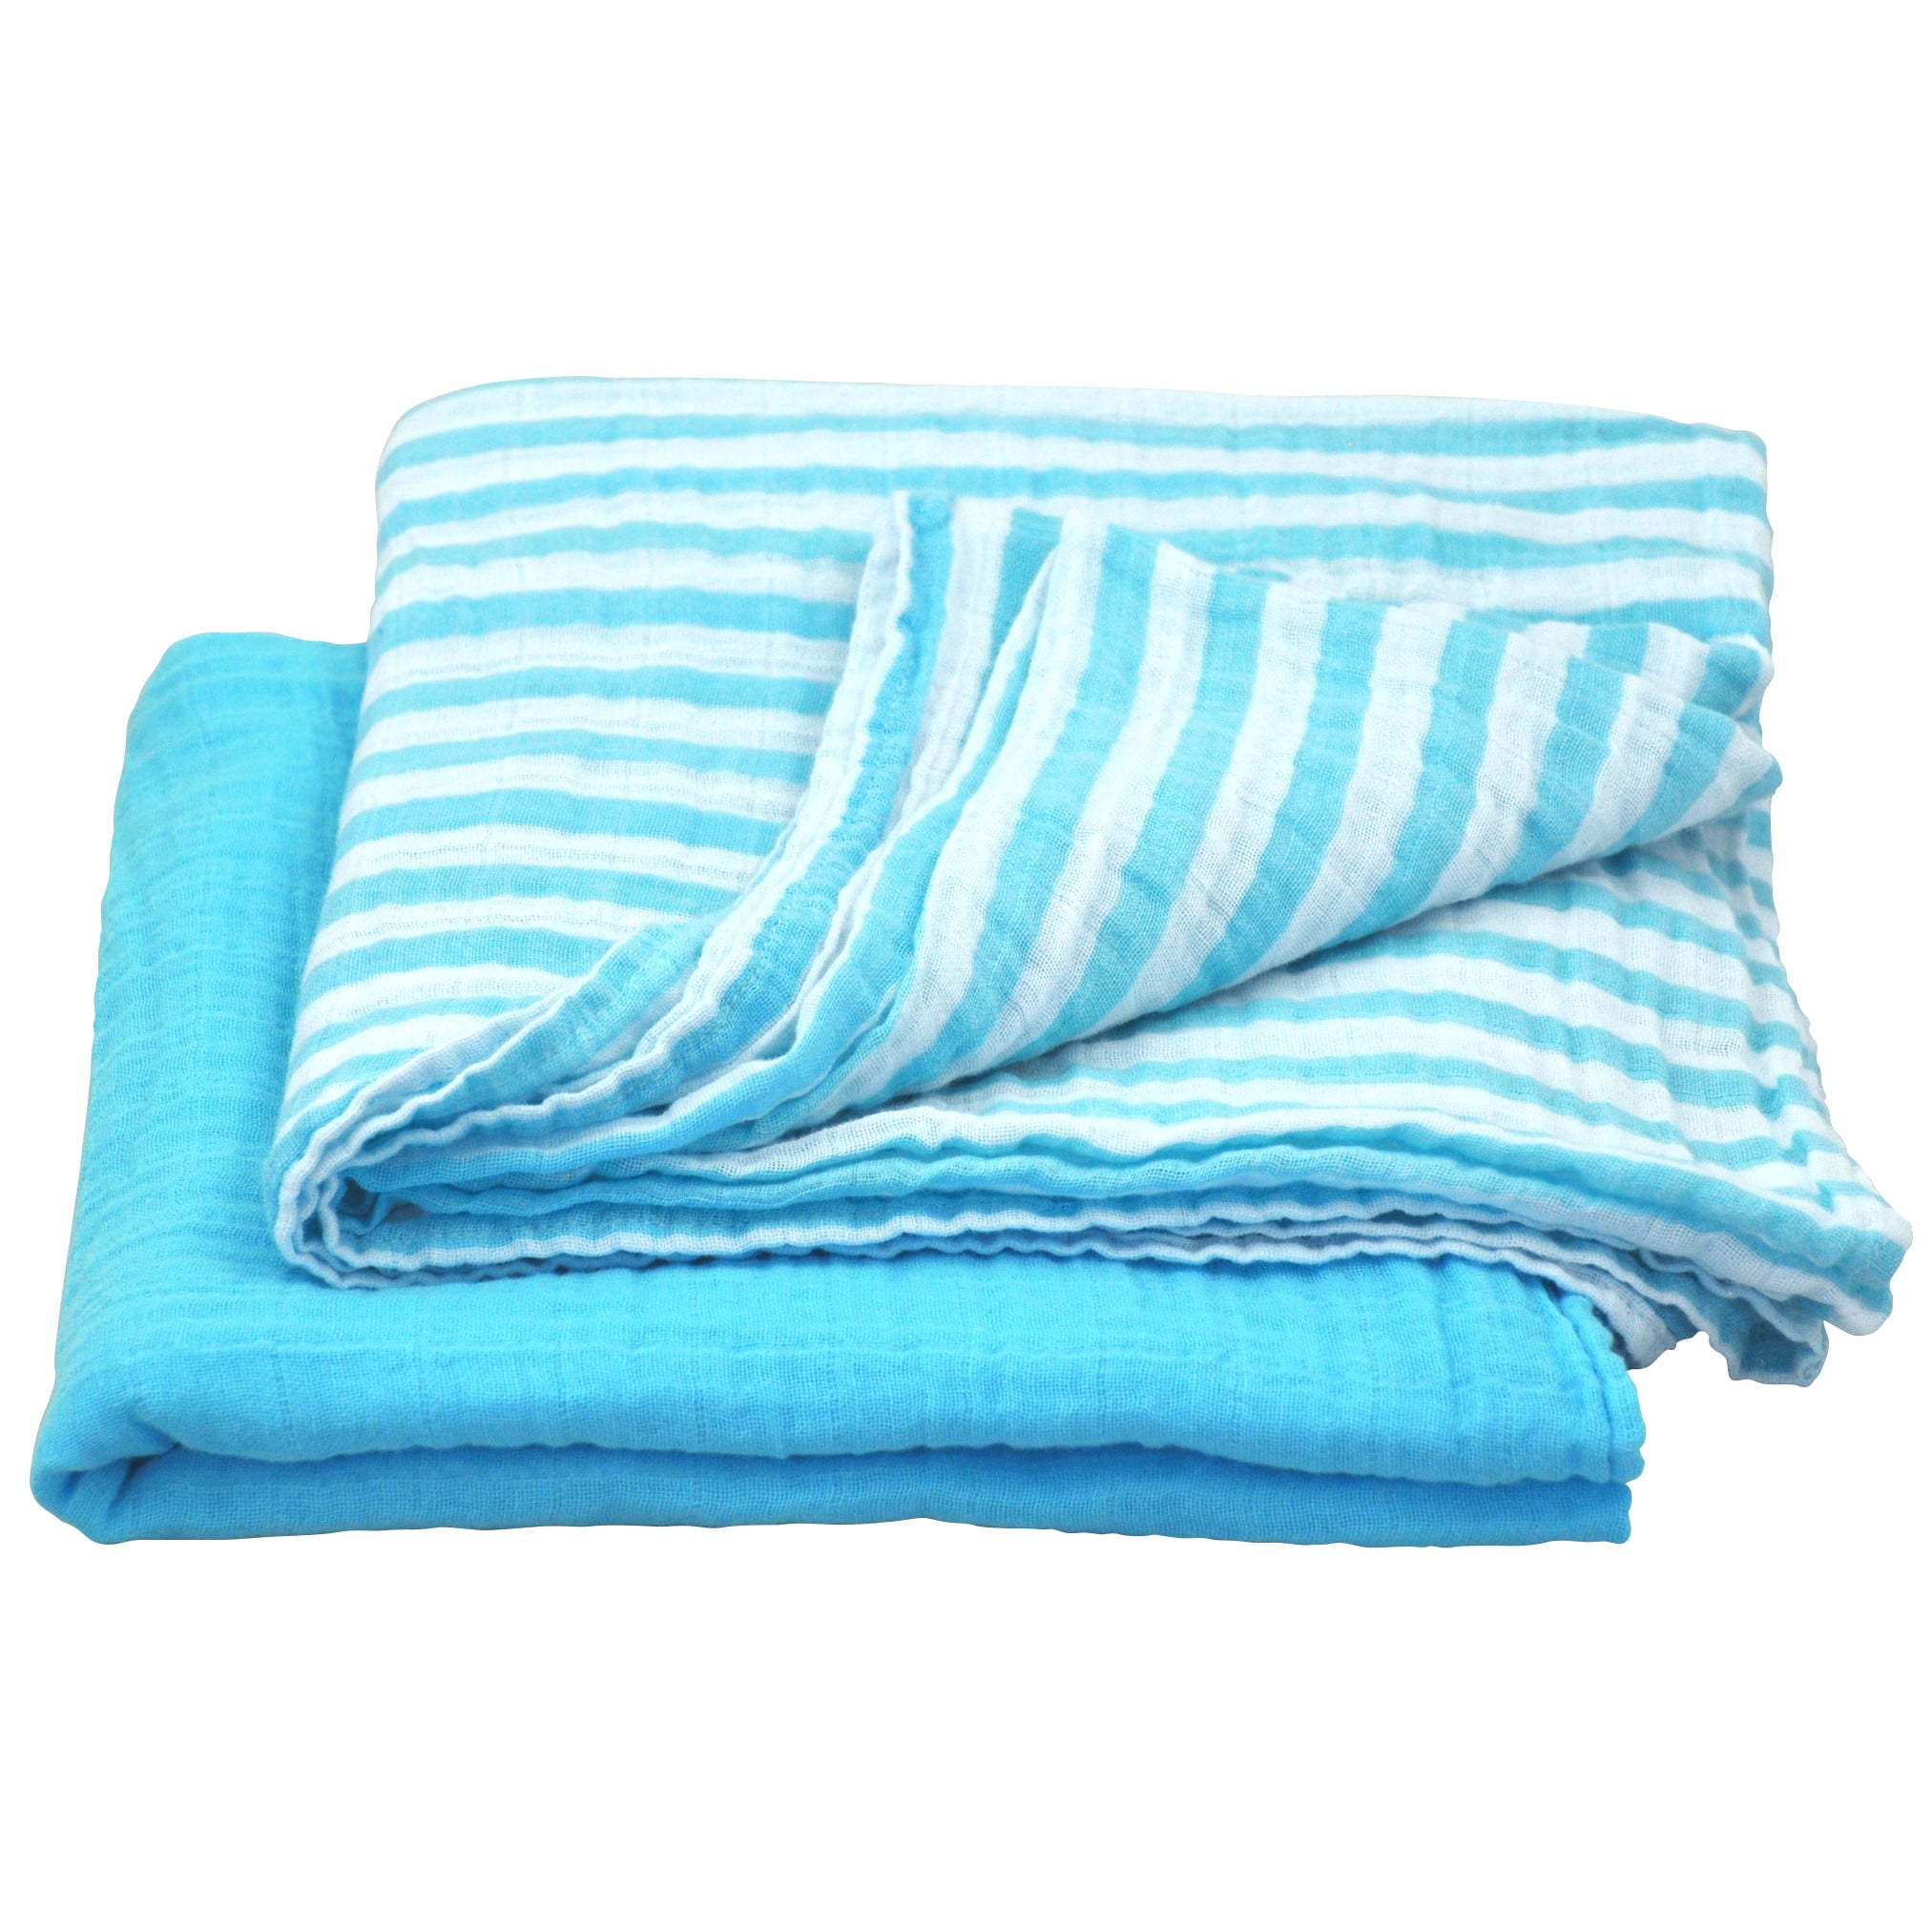 47"X47" SIZE WEESPROUT 100% ORGANIC COTTON MUSLIN SWADDLE BLANKETS 2 PACK 